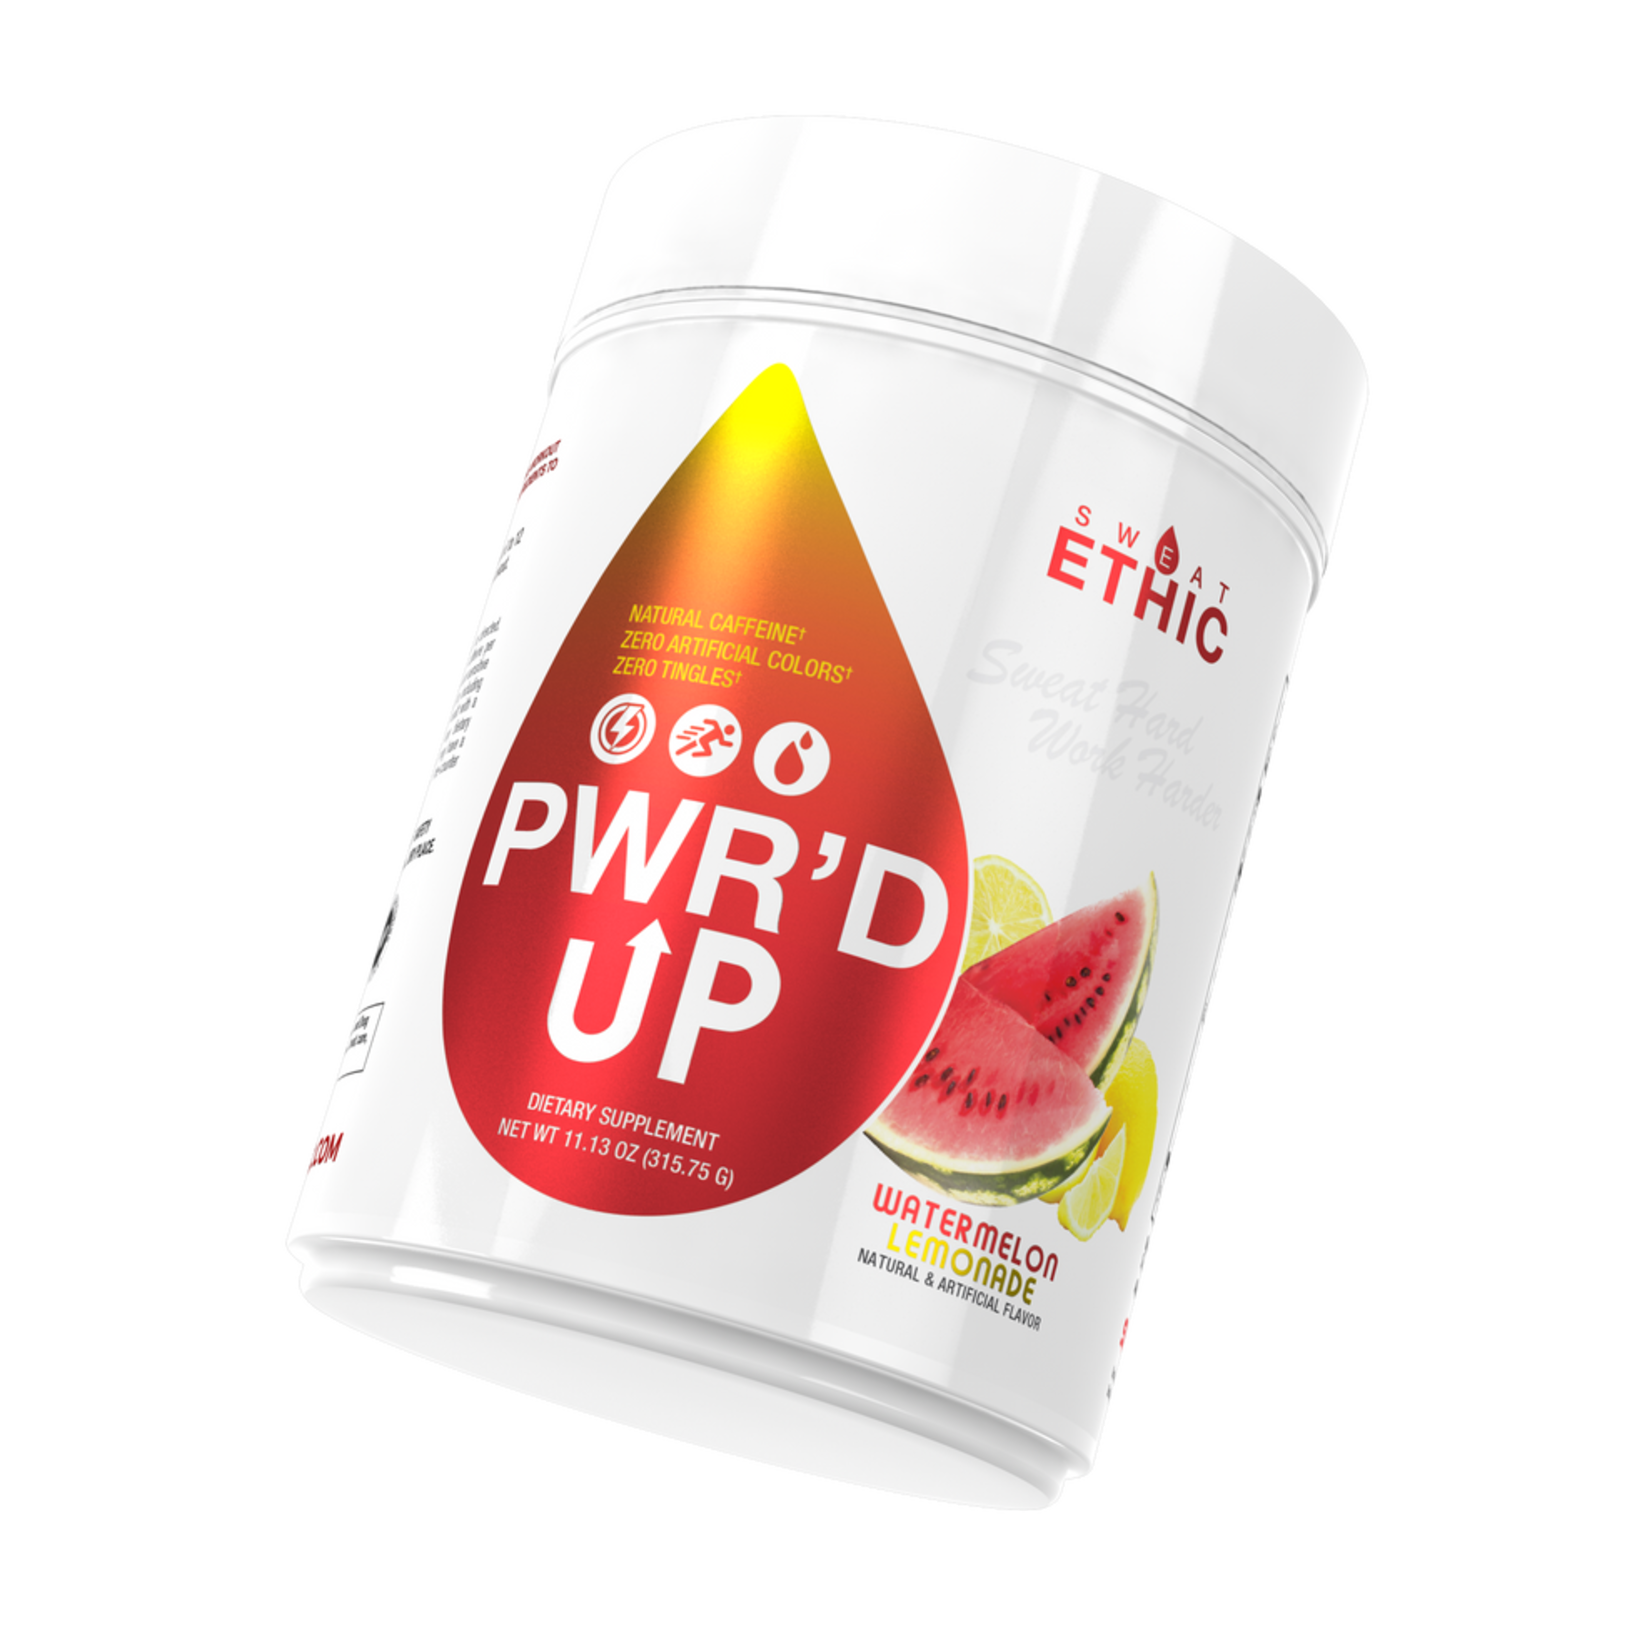 Sweat Ethic Sweat Ethic-Pwr'd Up